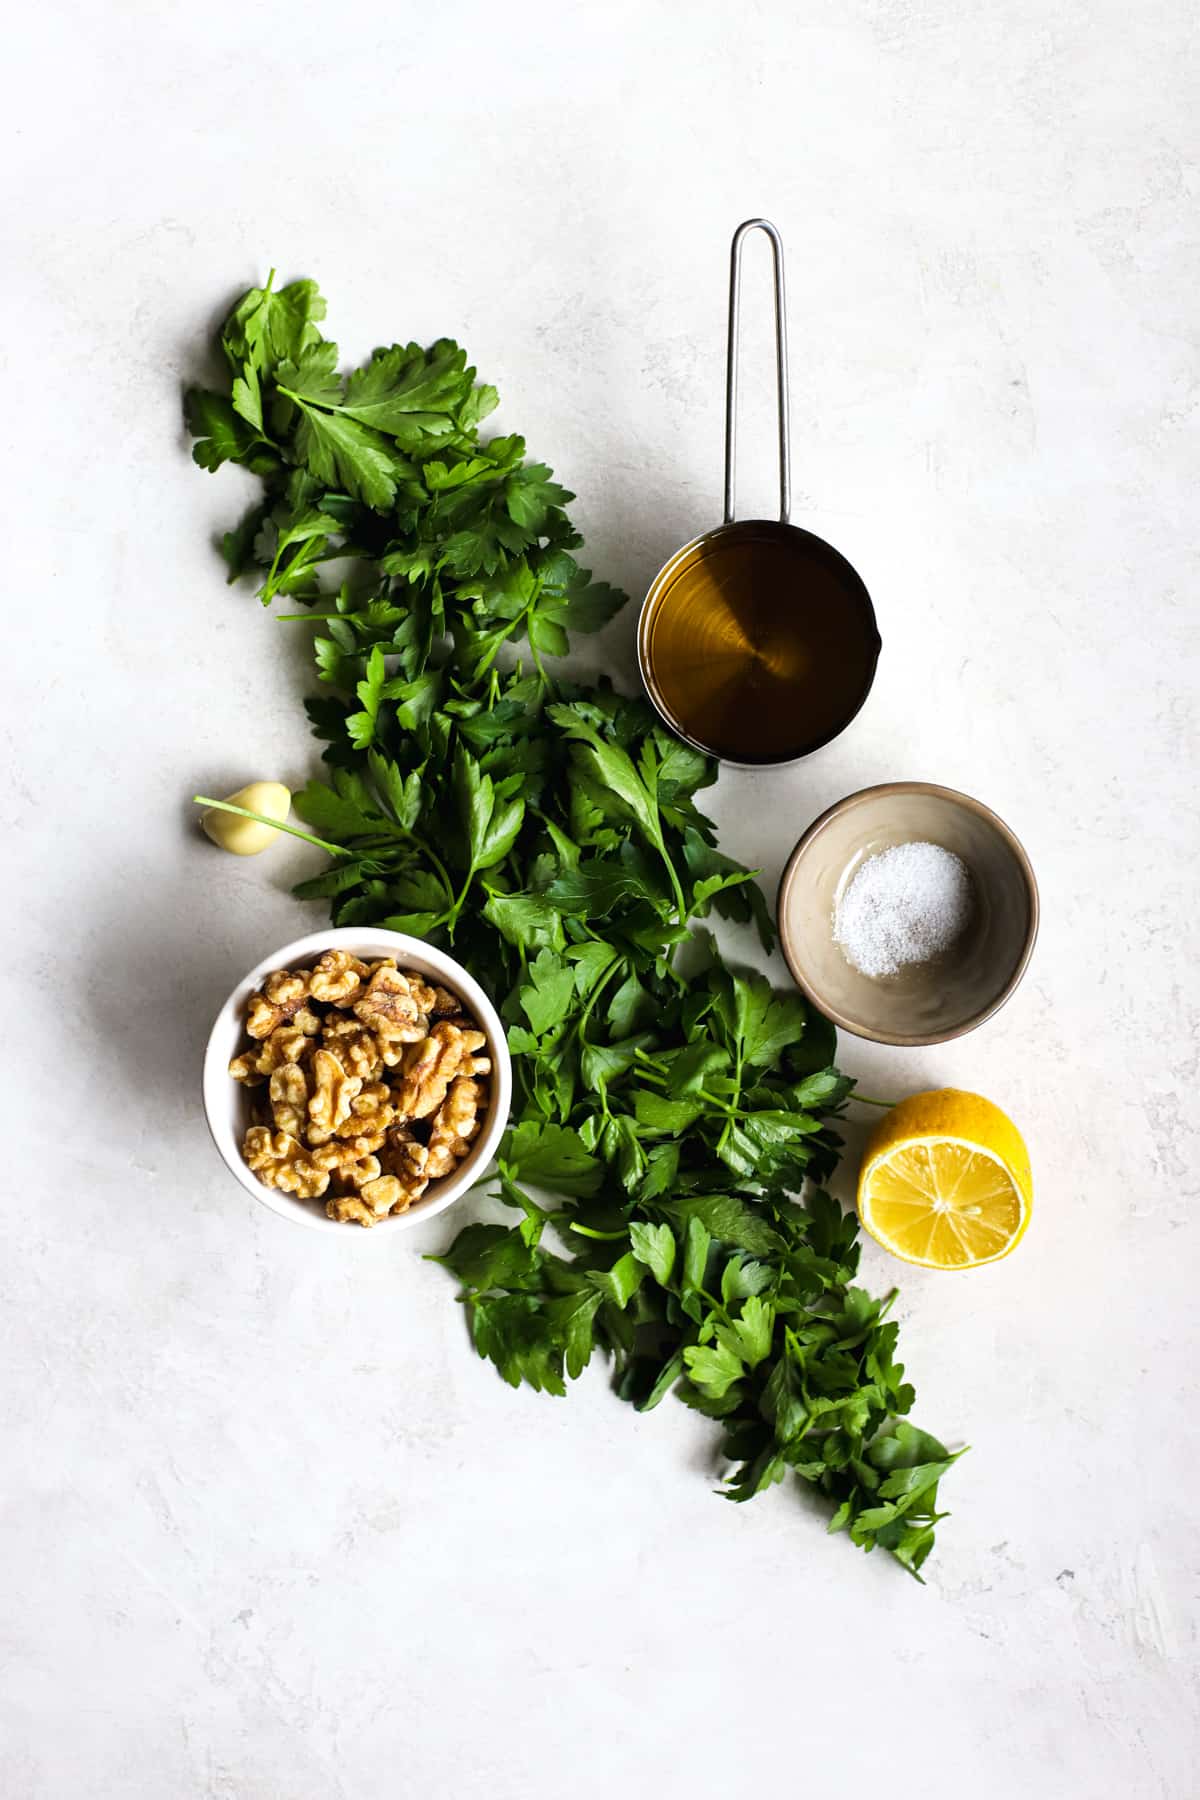 Parsley walnut pesto ingredients on light gray and white surface